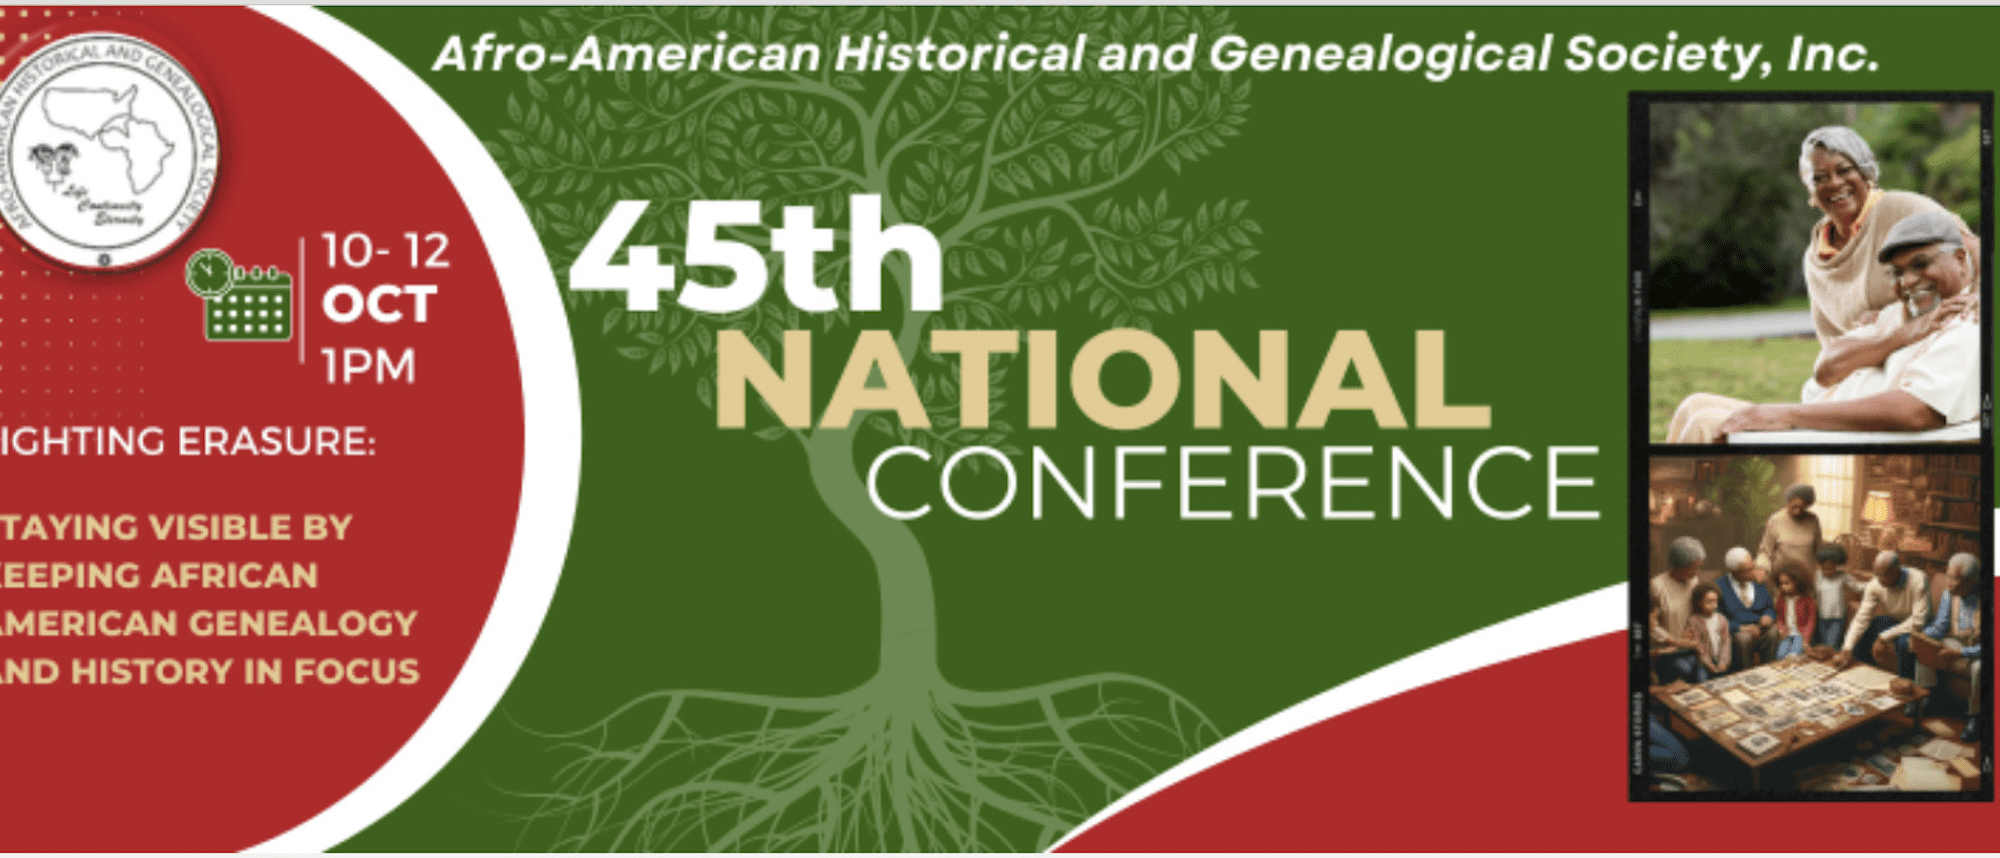 AAHGS 45th National Conference banner